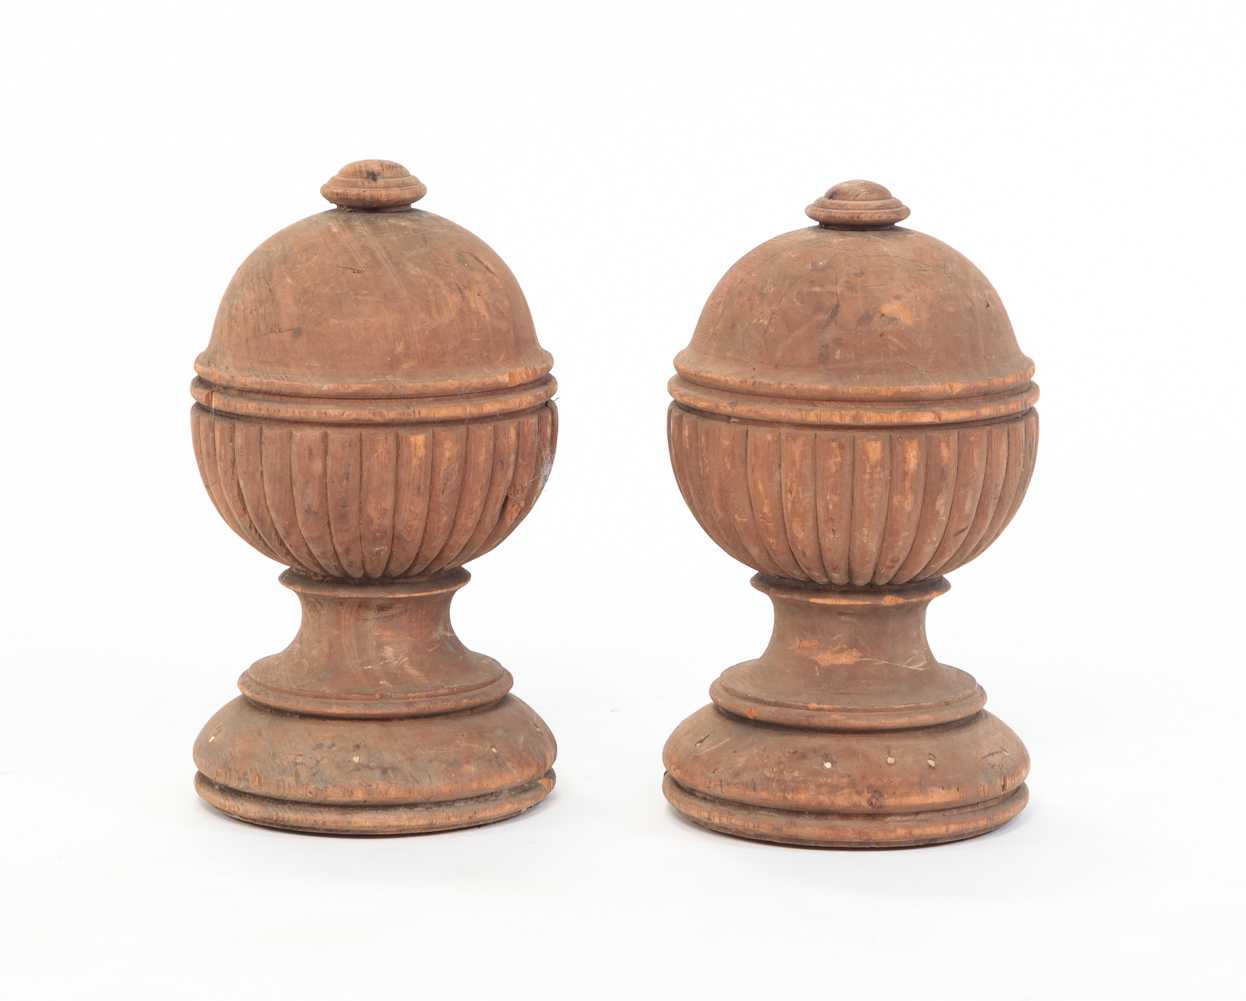 PAIR OF WOODEN ARCHITECTURAL FINIALS  2e0109